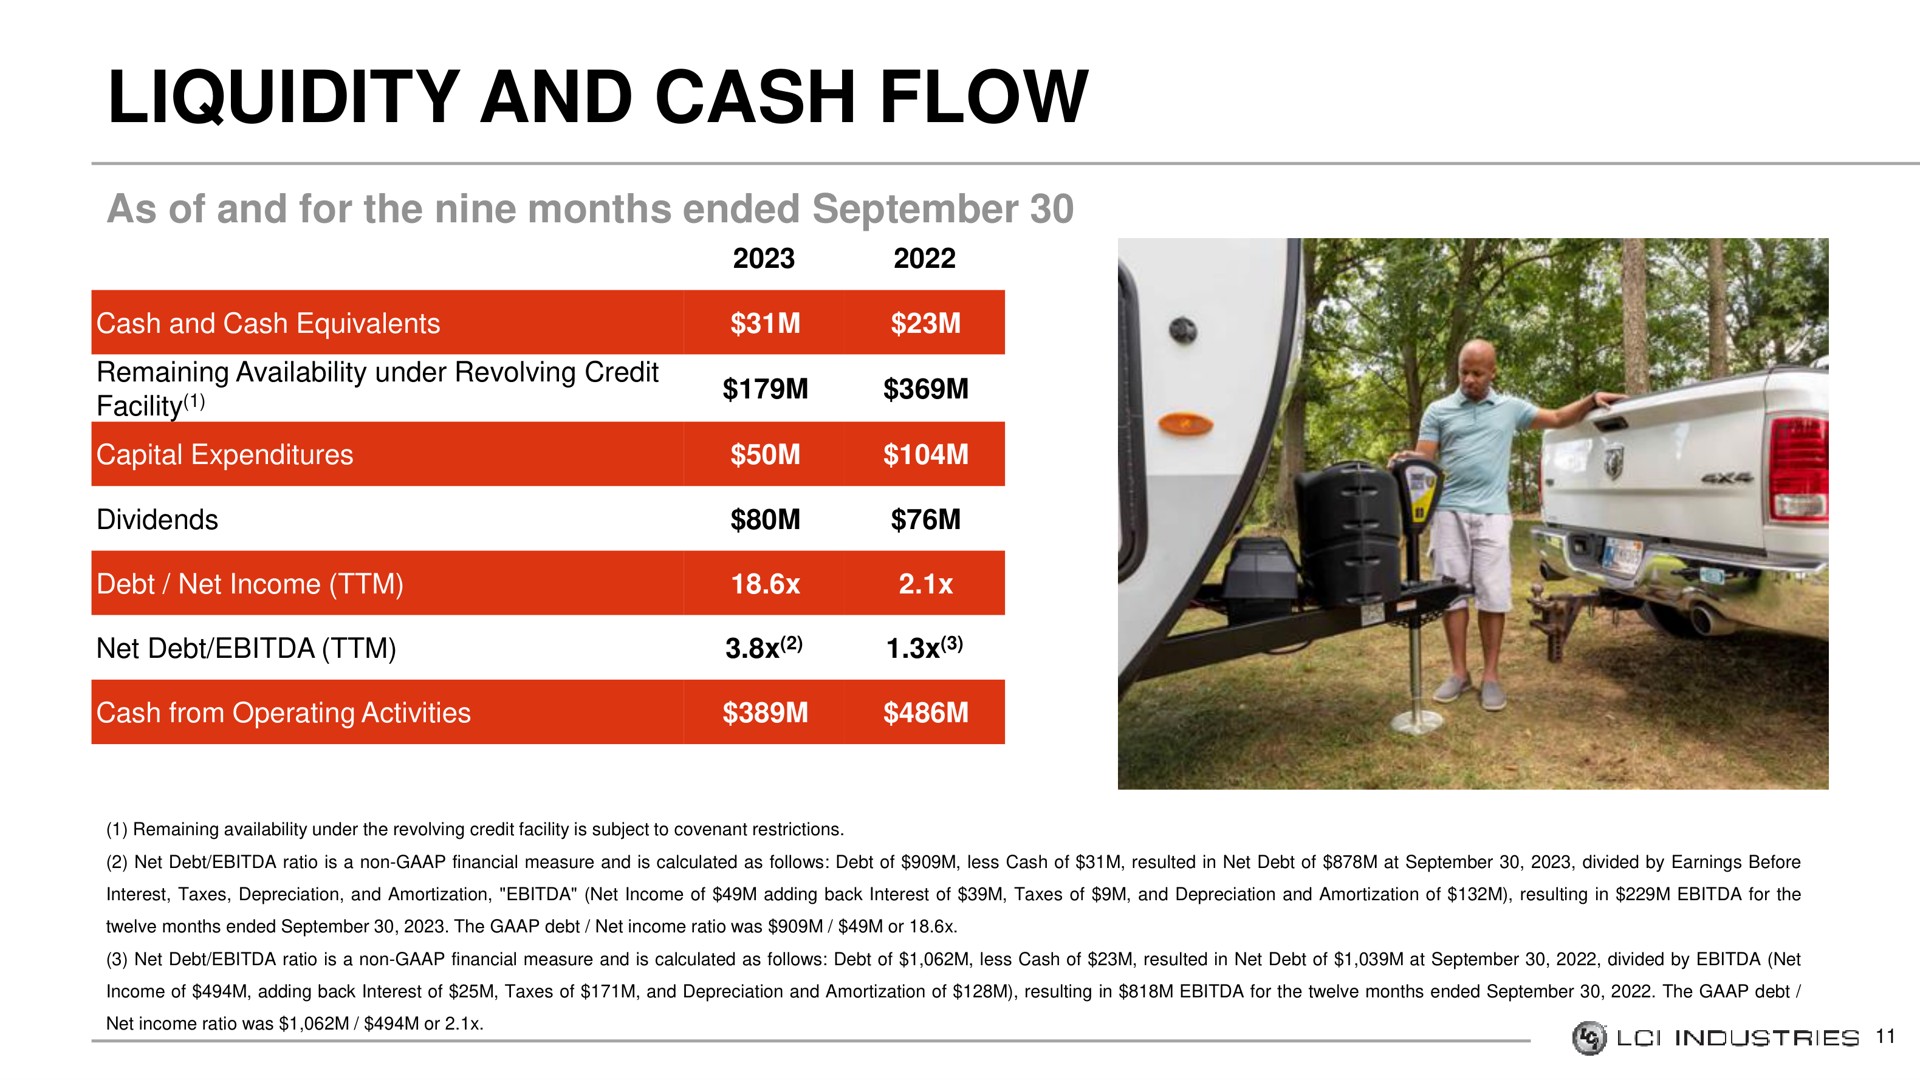 liquidity and cash flow | LCI Industries